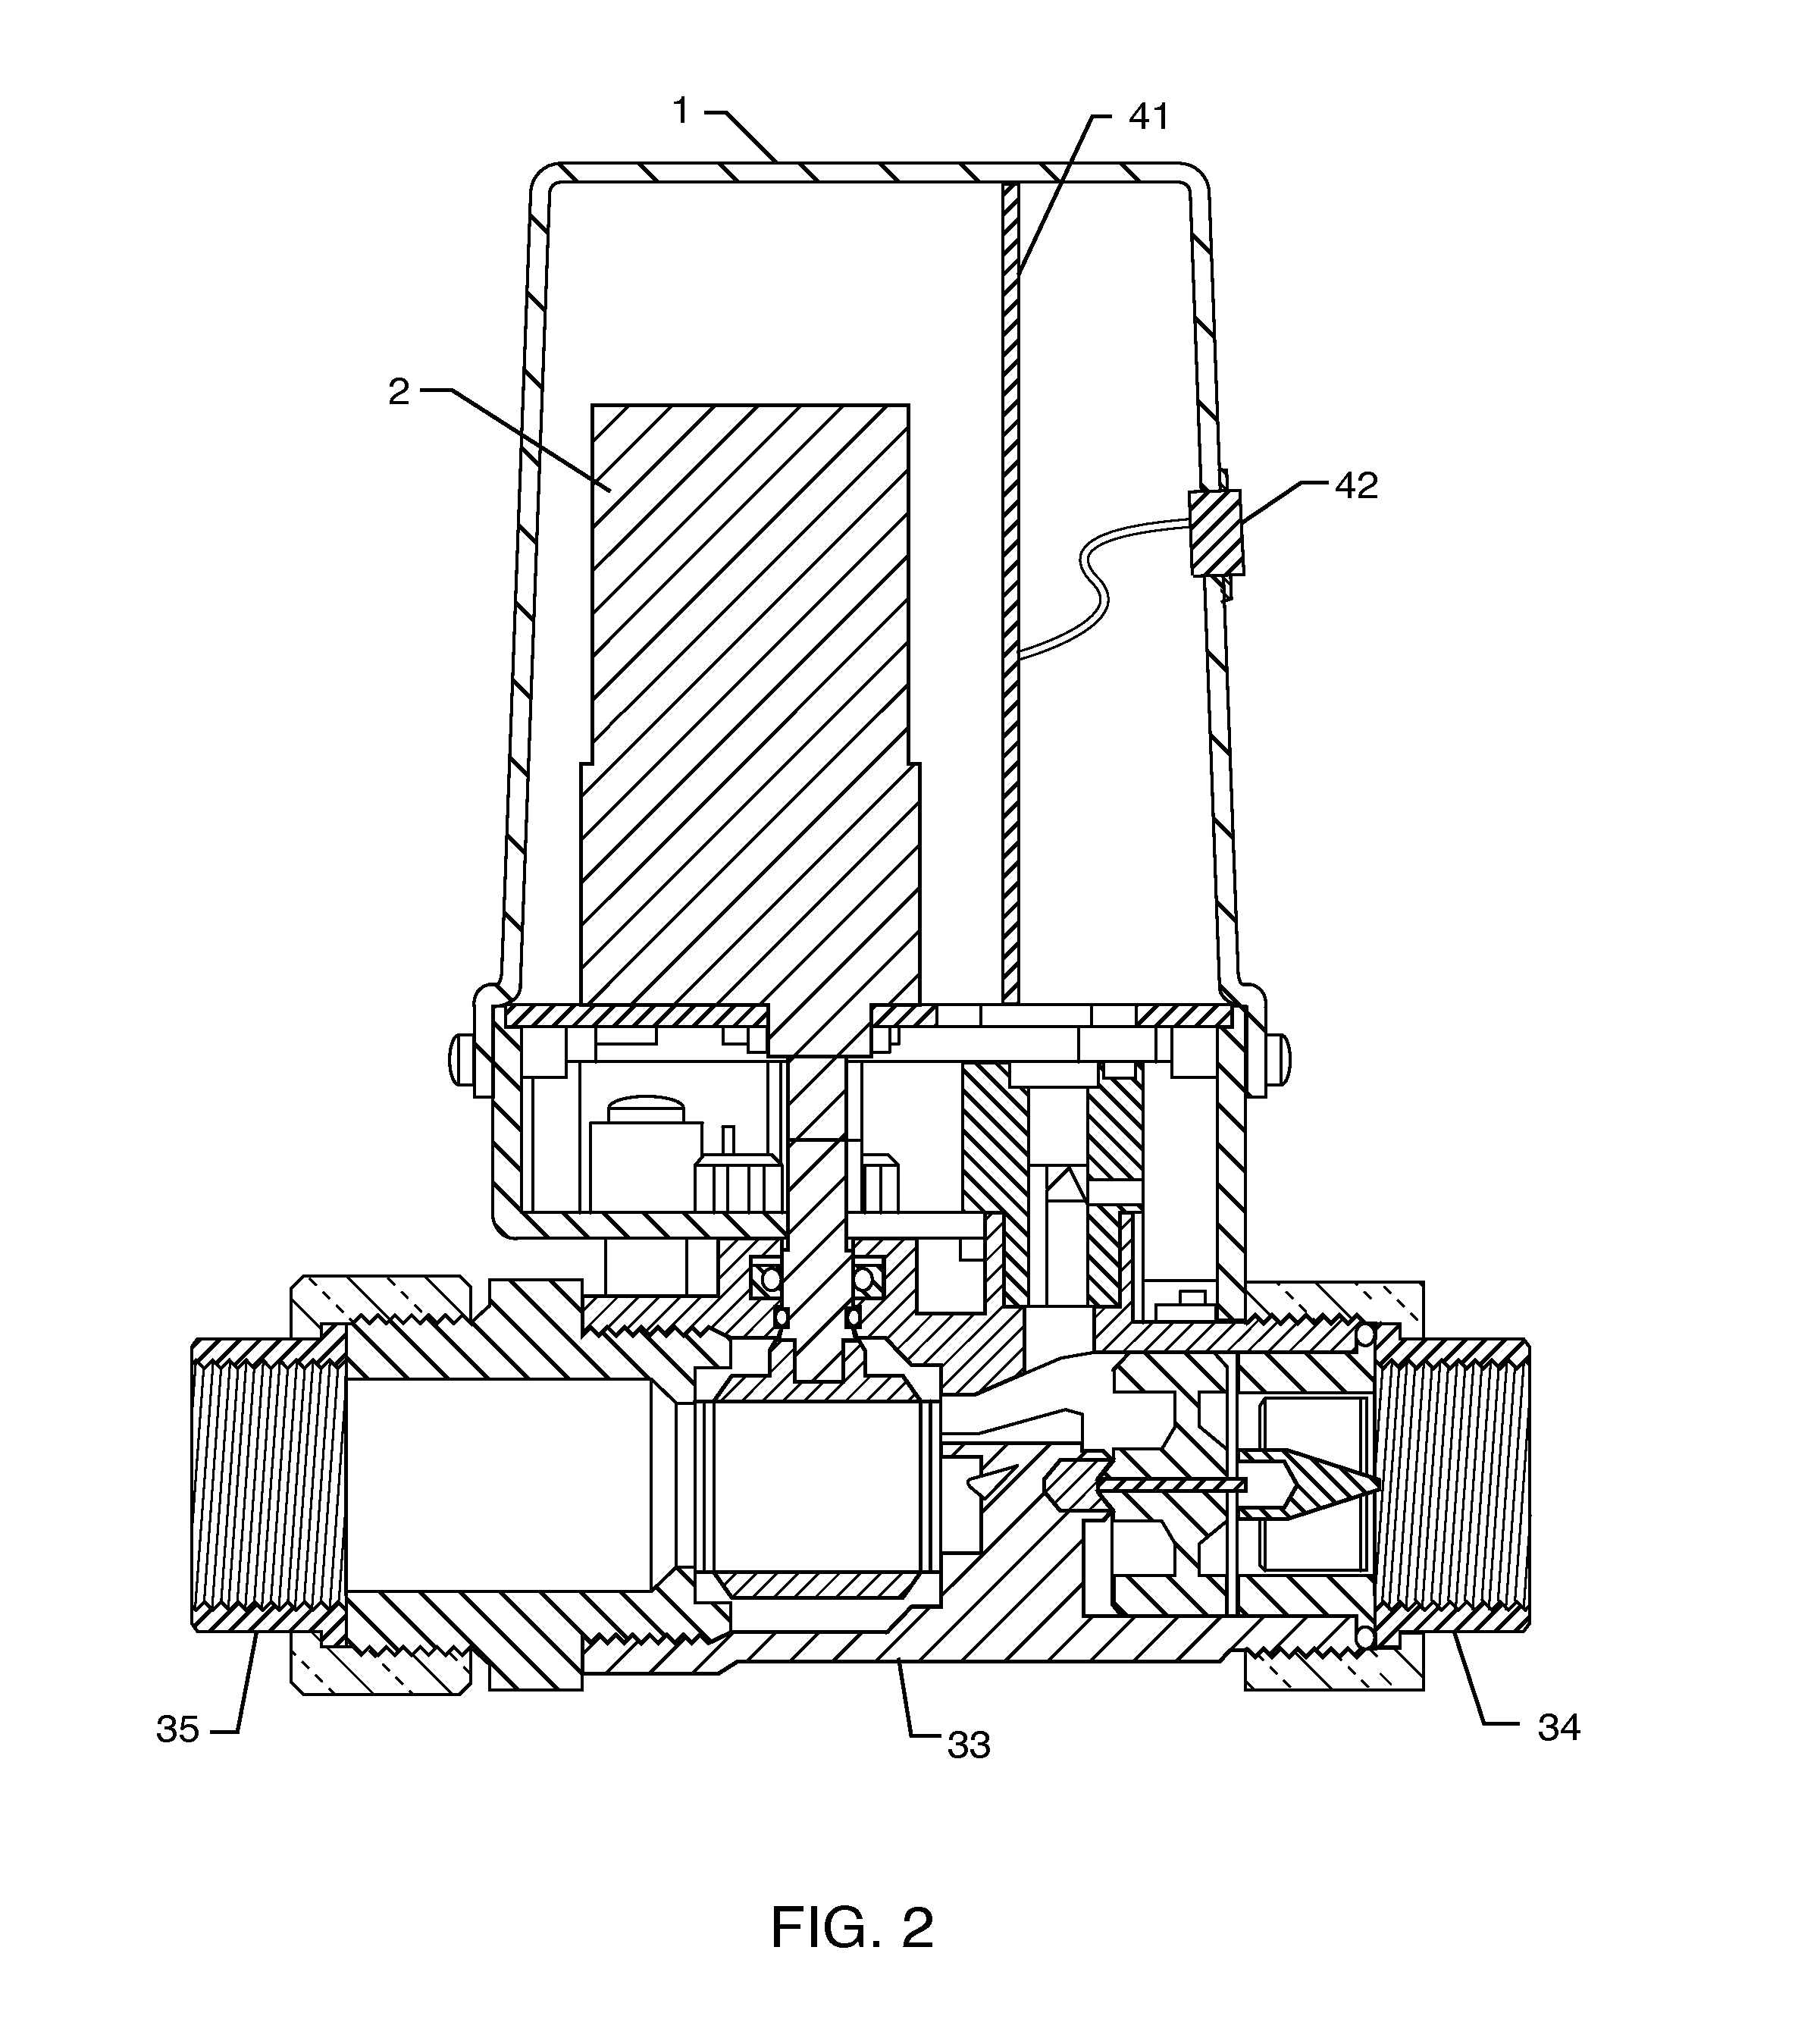 Fluid monitoring and control system